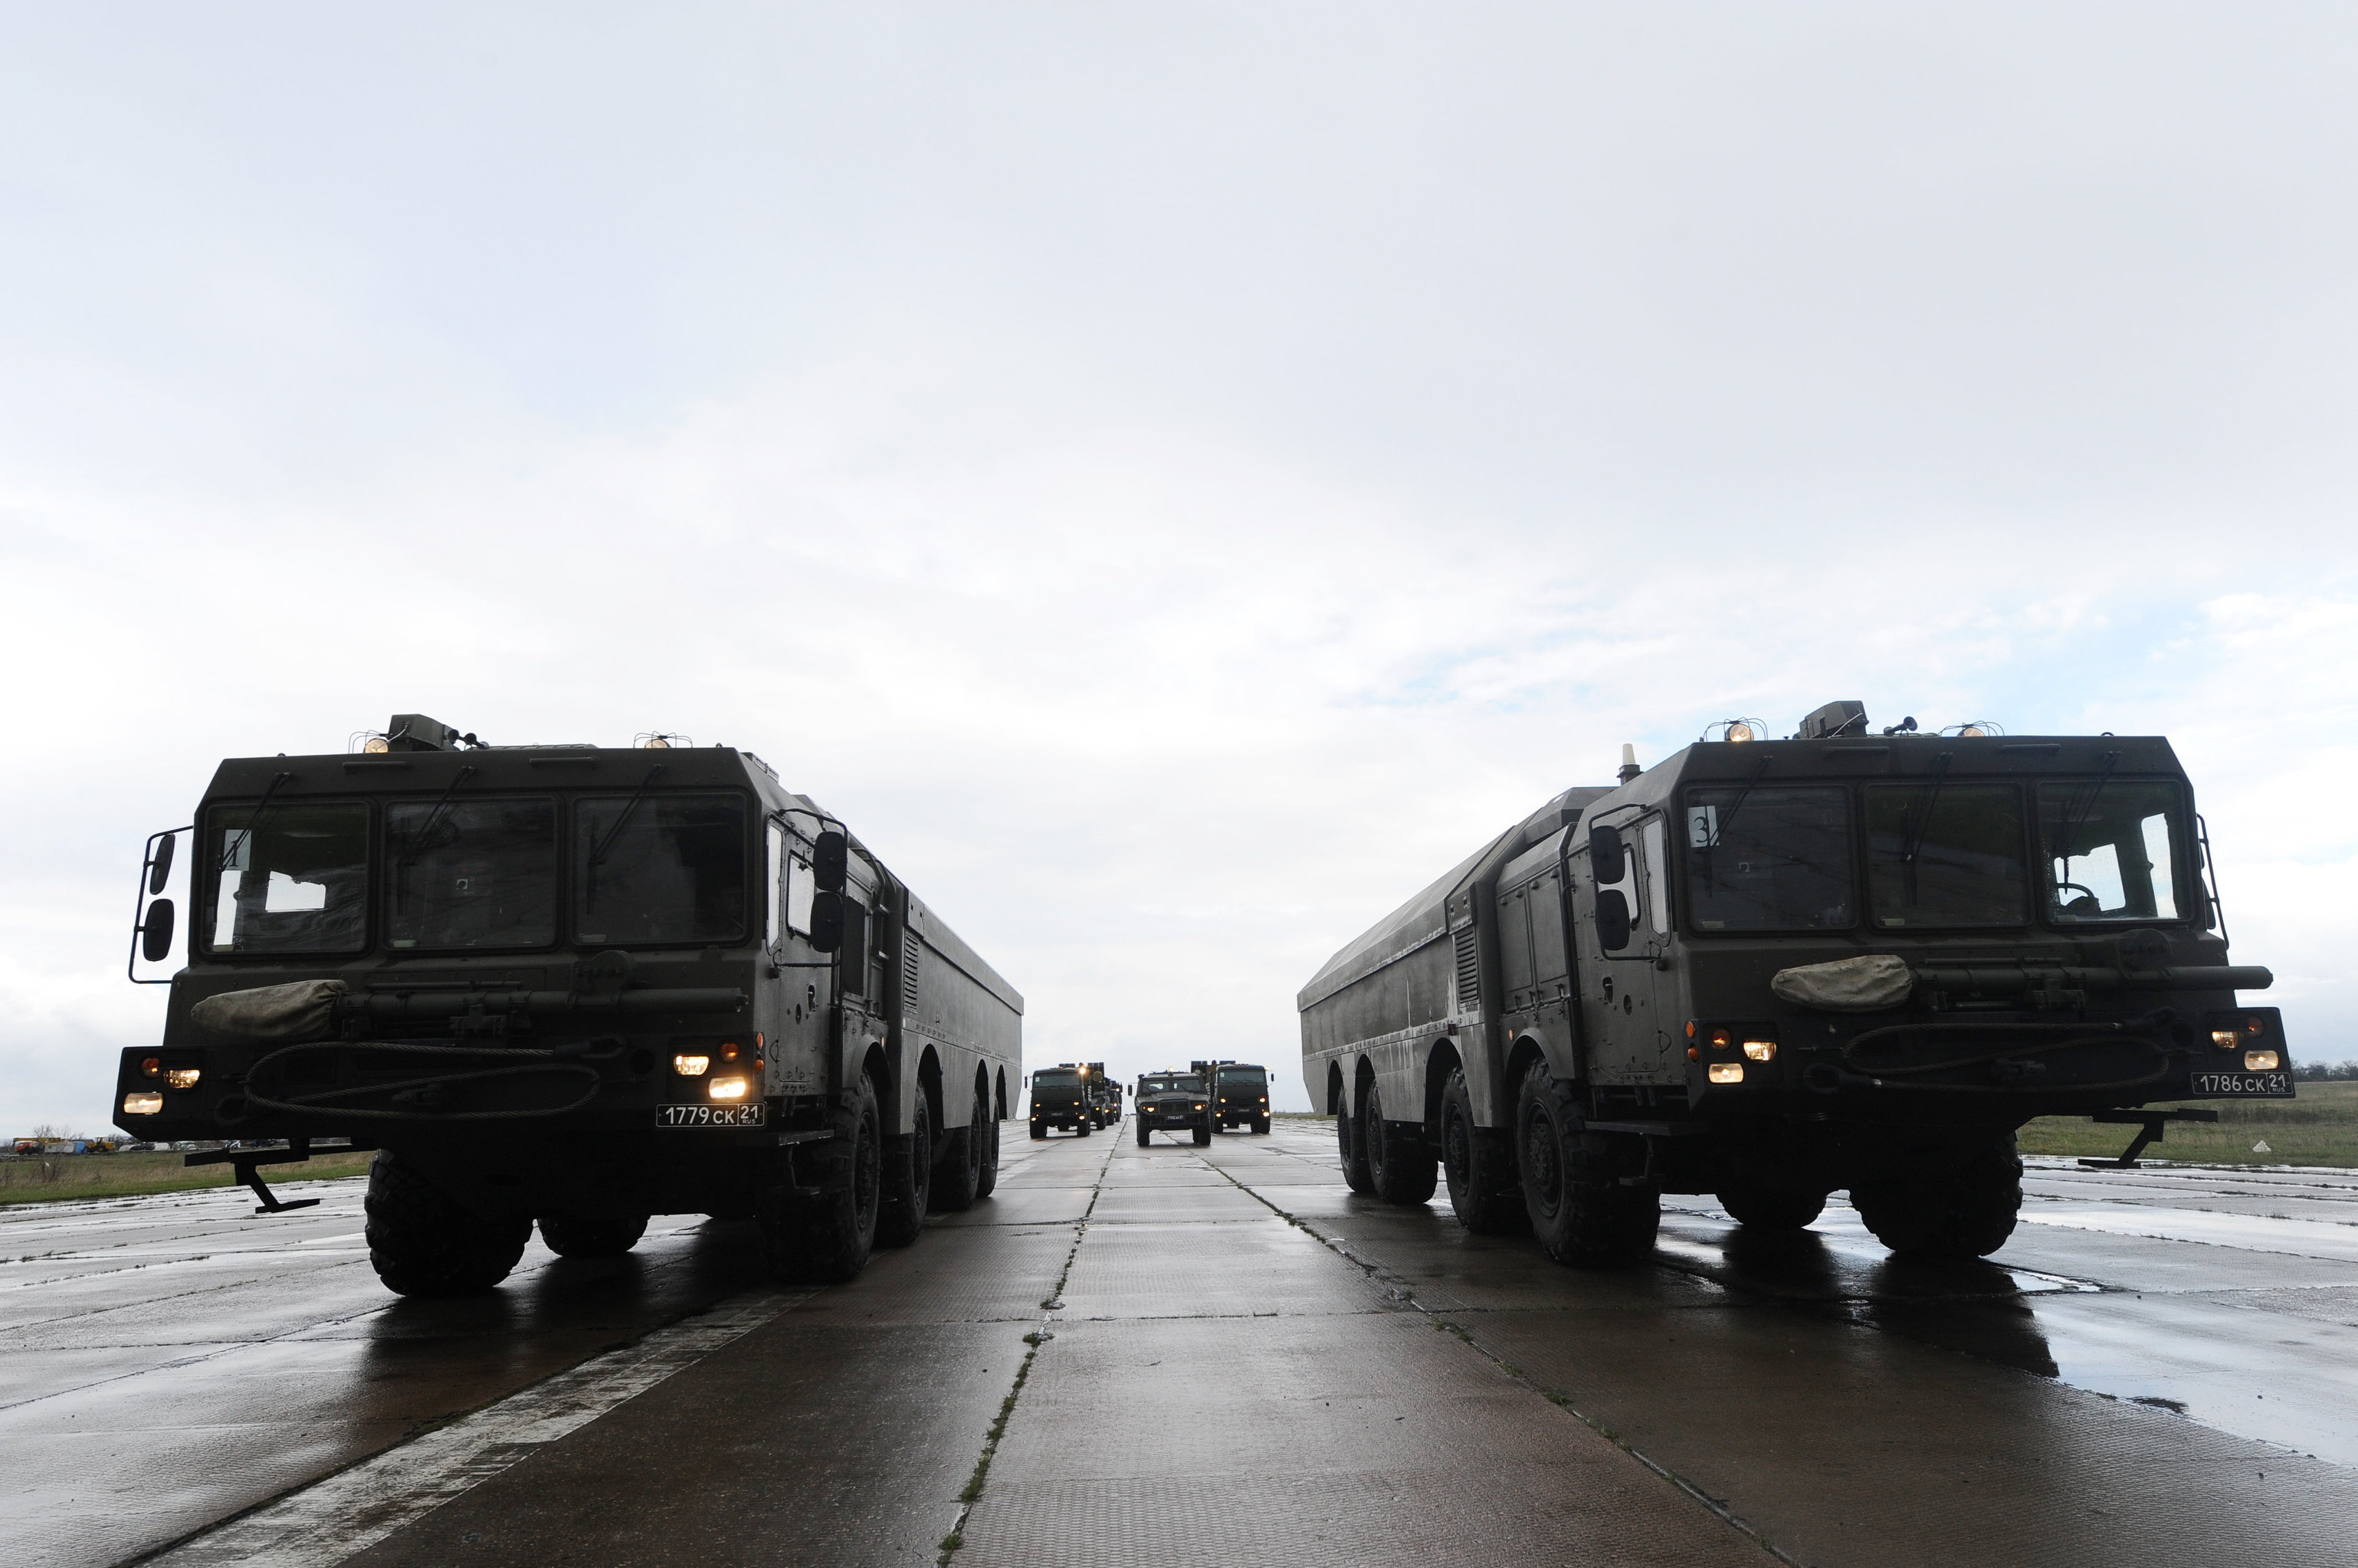 Russia's Bastion-P coastal defense missile system during a parade rehersal.